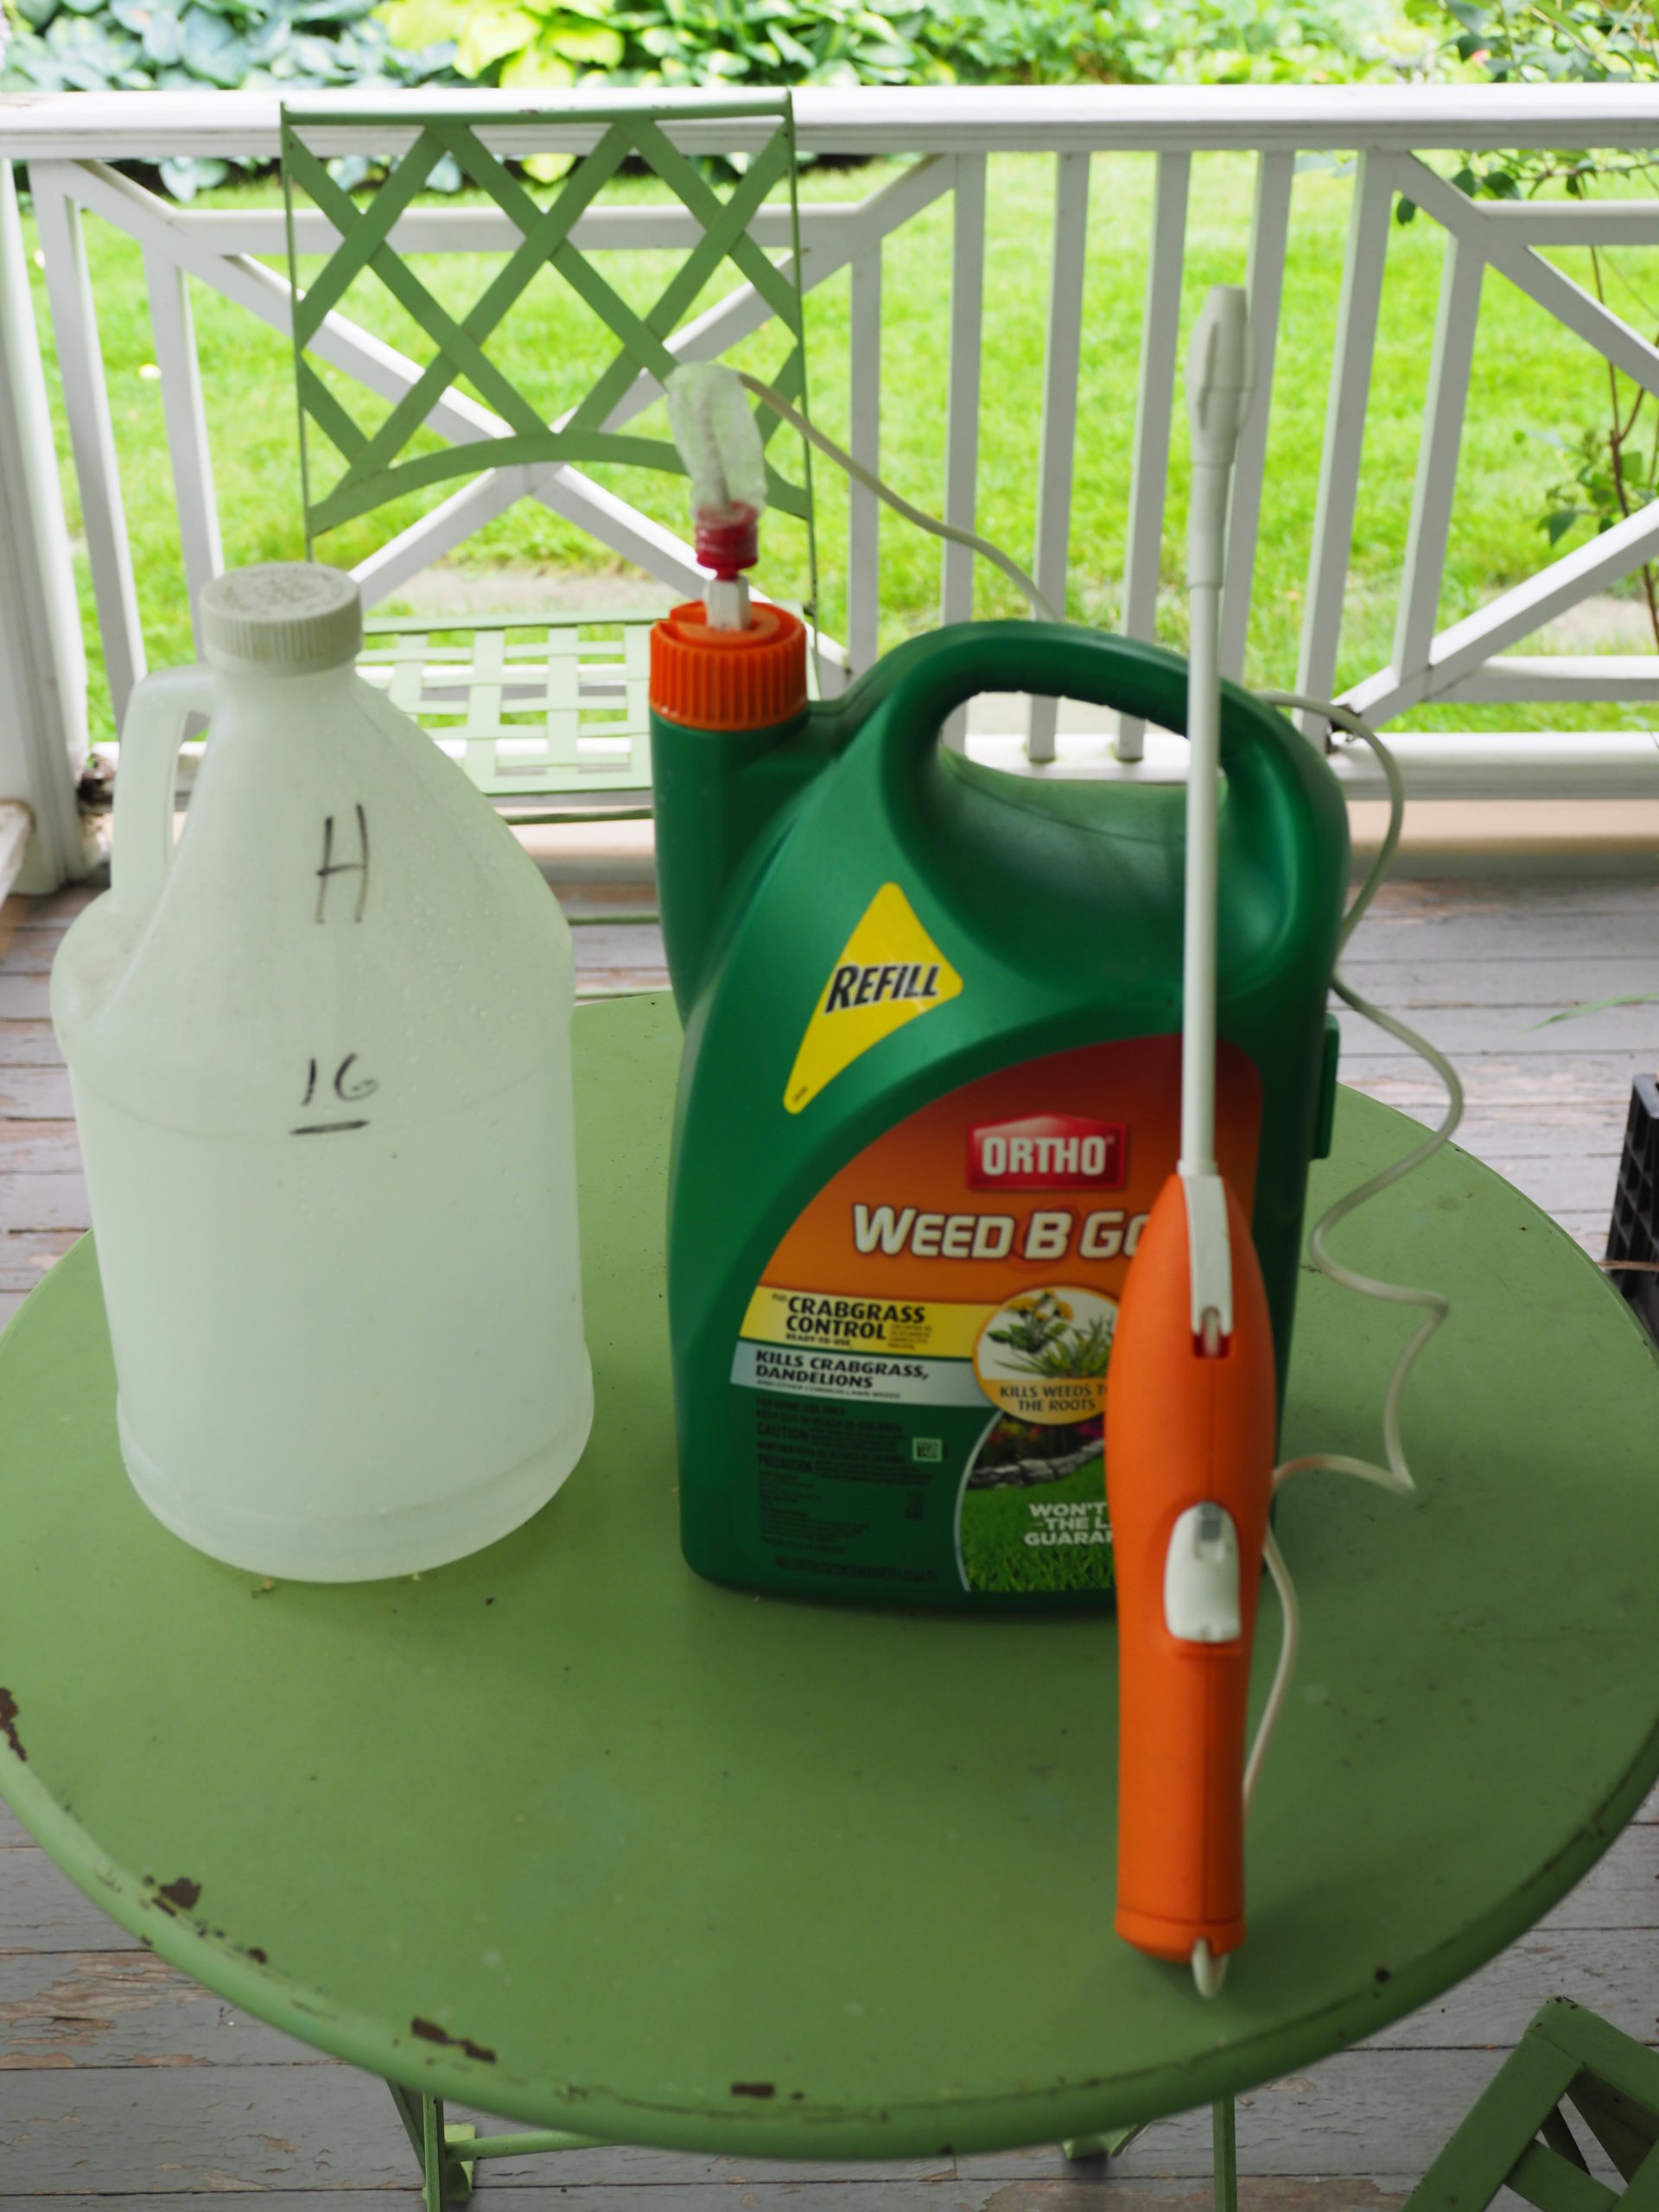 The spray wand and hose from this Ortho product can be removed from the gallon jug and simply attached to another jug so it can be used as a spot sprayer.  The spray wand runs on four AAA batteries, which can be replaced.  Note the 